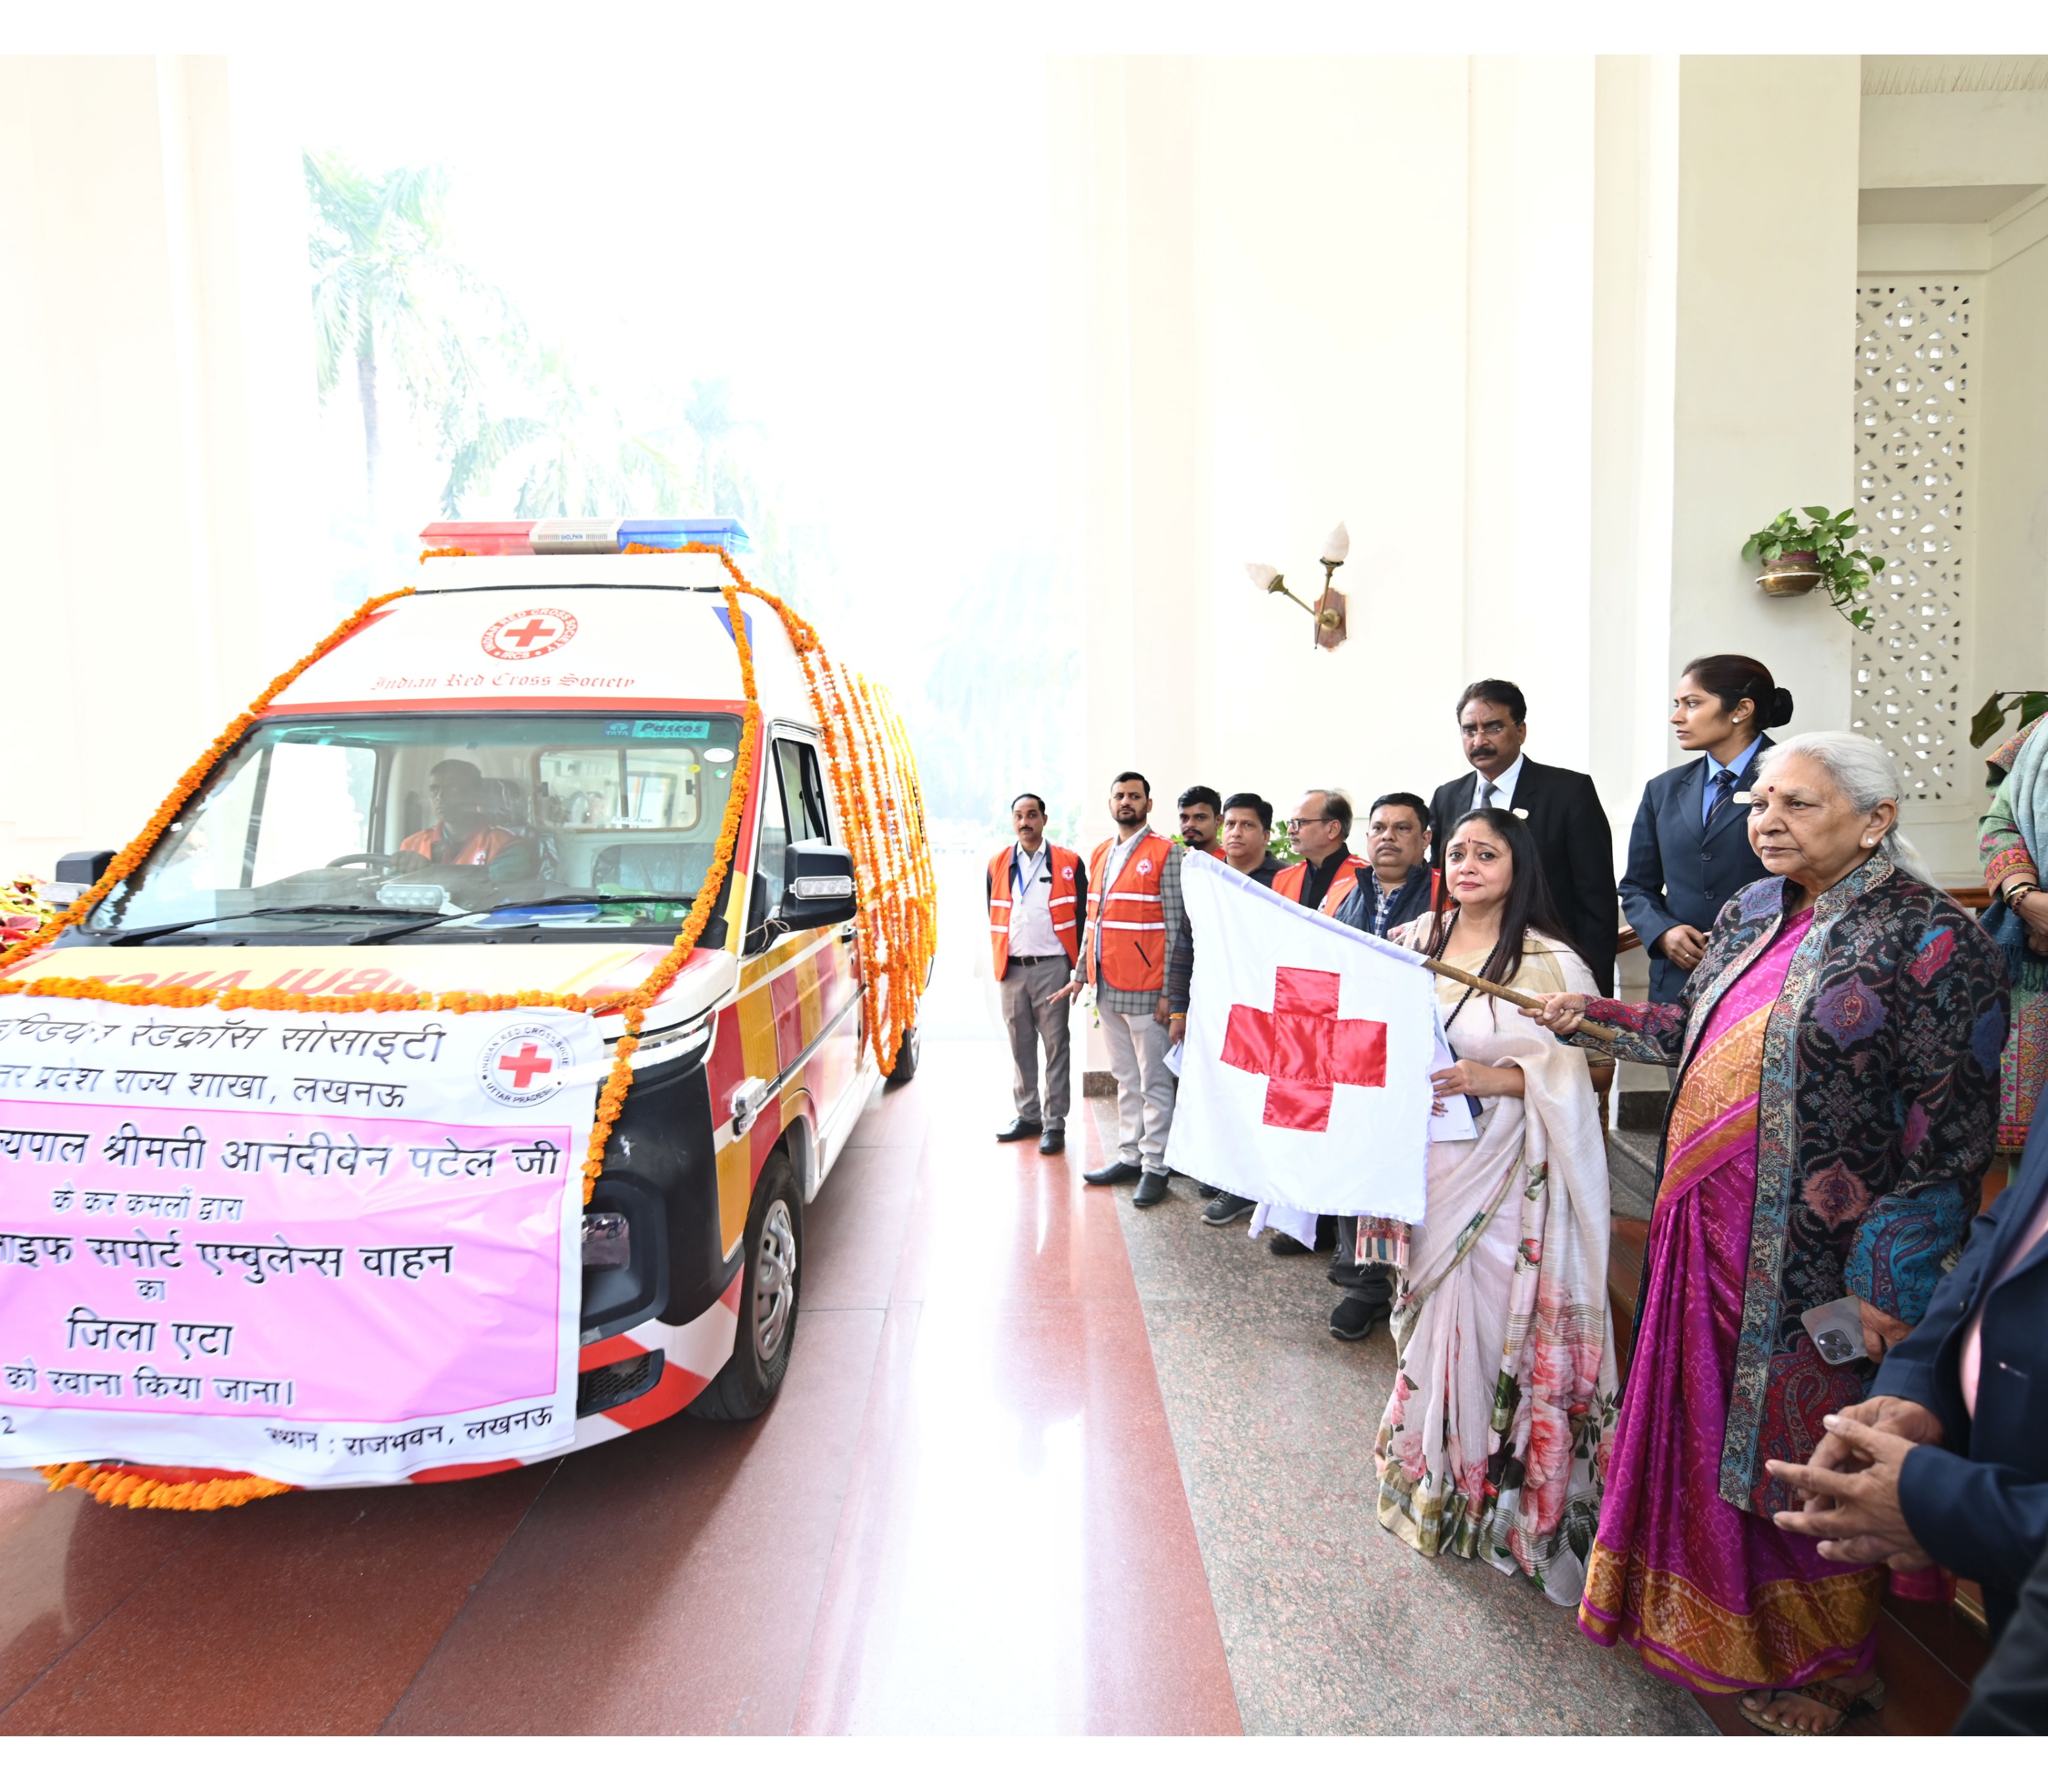 The Governor flagged off the ambulance.